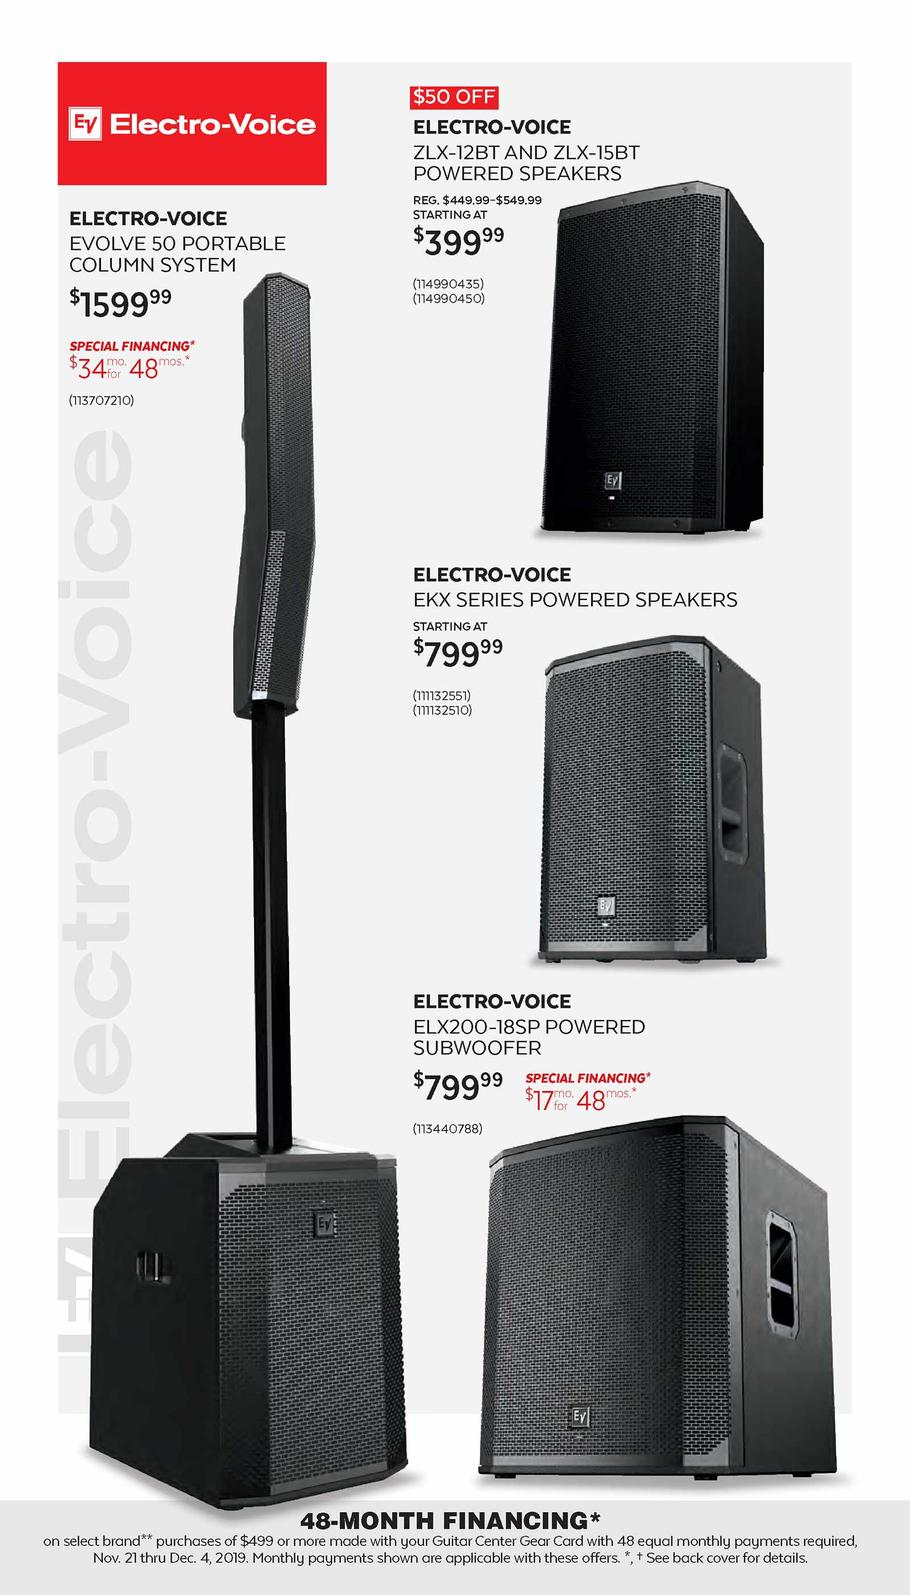 Guitar Center Black Friday Ad Scan, Deals And Sales 2019 ... à Black Friday Cuir Center